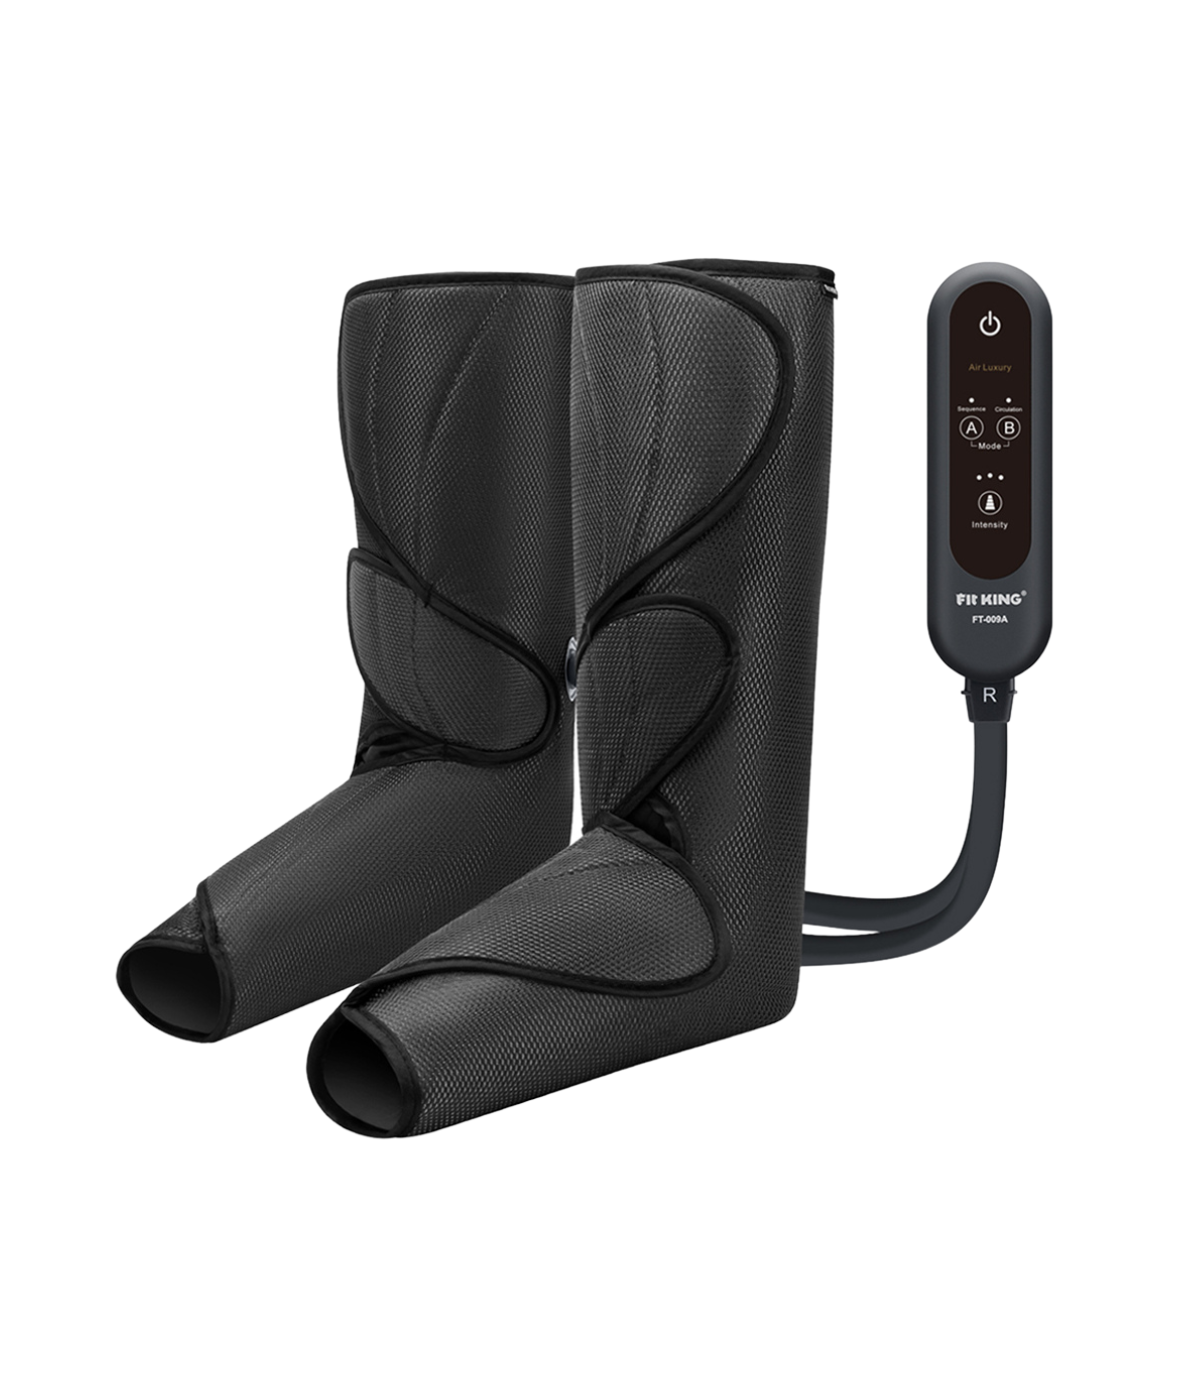 Smart Leg Massager with Remote Control Functionality